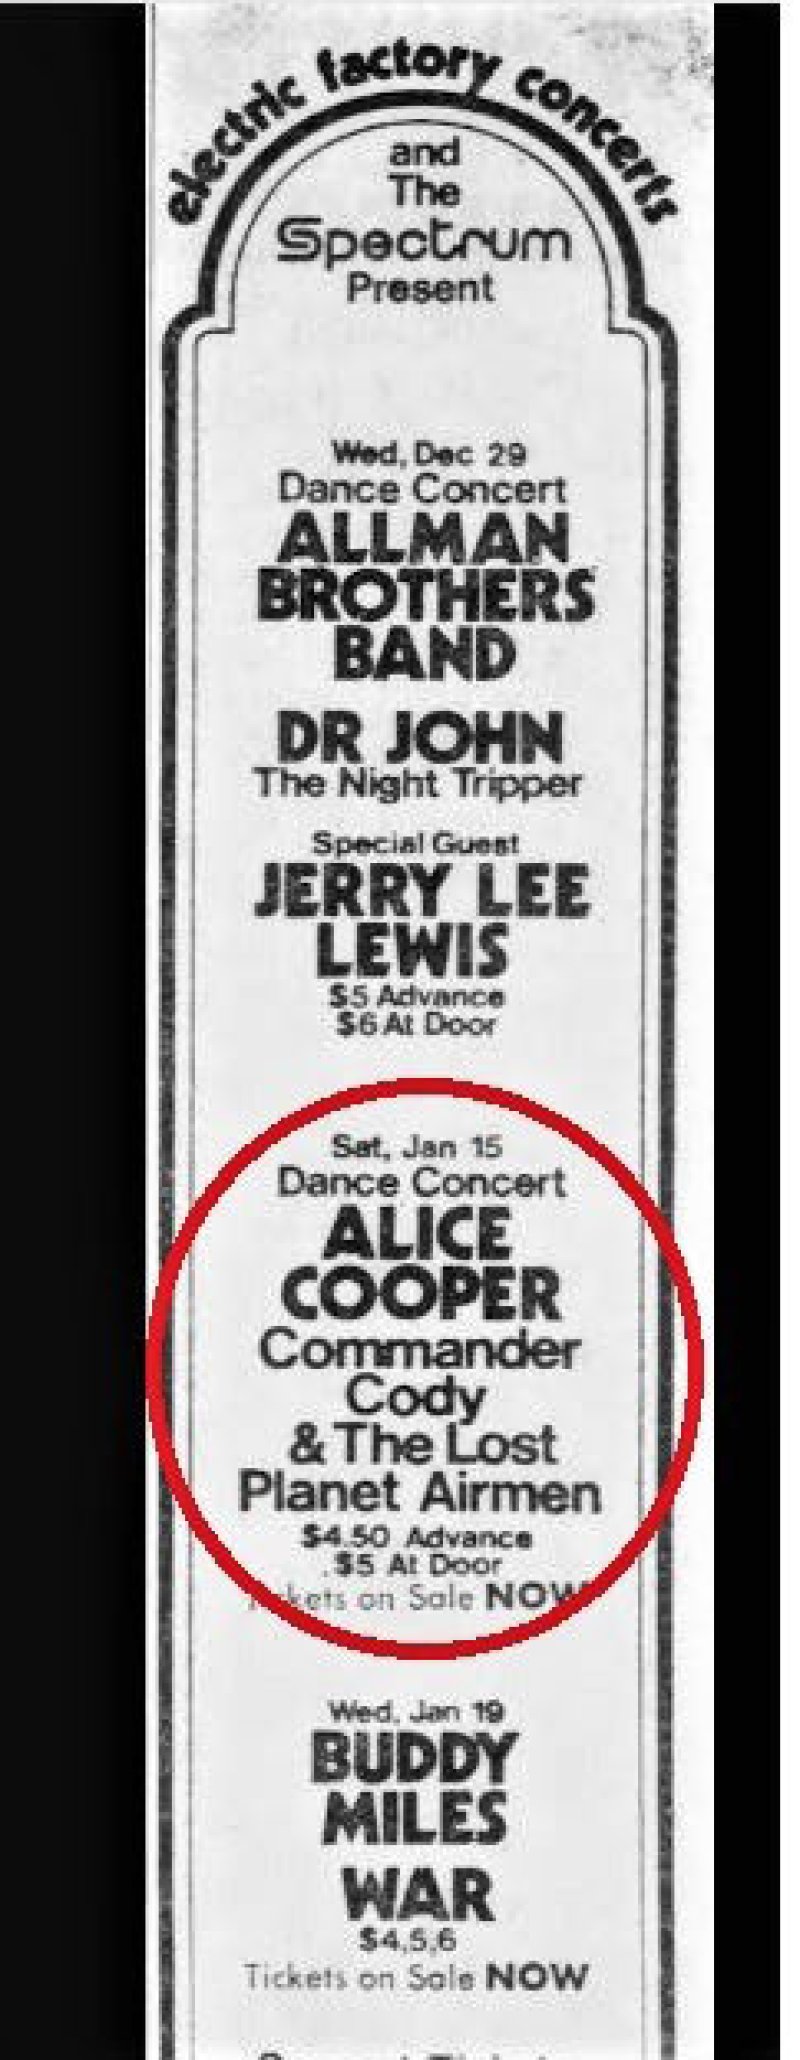 Dating back to the 1960’s, Commander Cody &amp; The Lost Planet Airmen shared the stage with everyone from The Stooges to the Grateful Dead. Image: advert indicating a concert bill in Philadelphia with Alice Cooper, Jan. 15, 1972, attended by more than 17,000 fans. Tickets: $4.50.